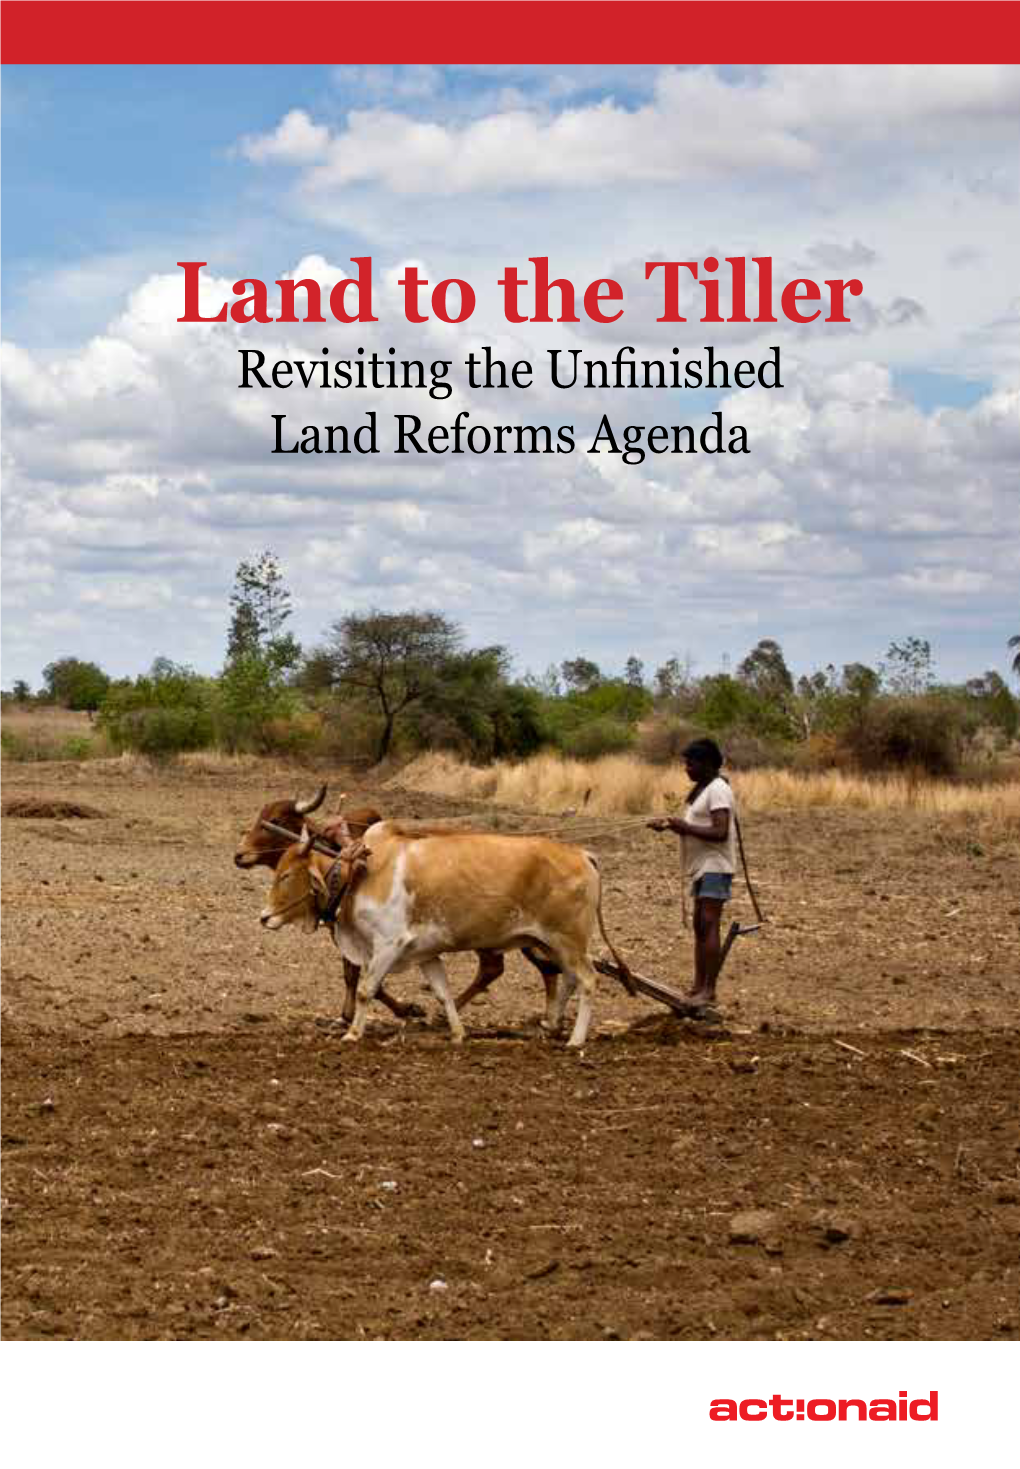 Land to the Tiller Revisiting the Unfinished Land Reforms Agenda